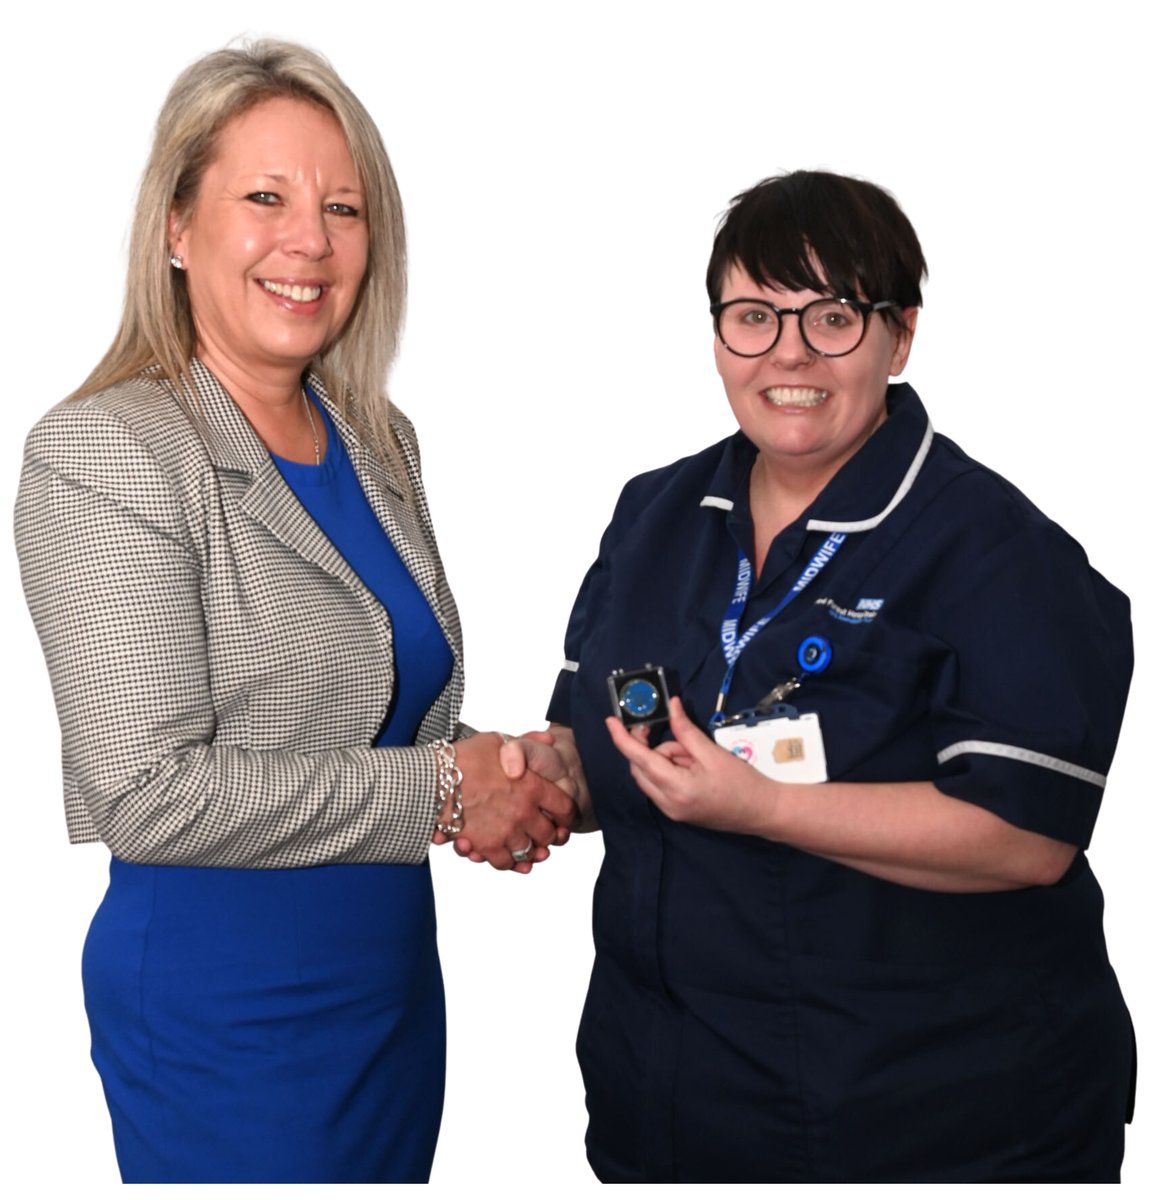 Congratulations to Recruitment and Retention Midwife Sharon Parker and Lead Professional Midwifery Advocate Julia Andrew who received the prestigious Chief Midwifery Officer Silver Award in recognition of going above and beyond. Well done and thank you! tinyurl.com/3dydyh7t